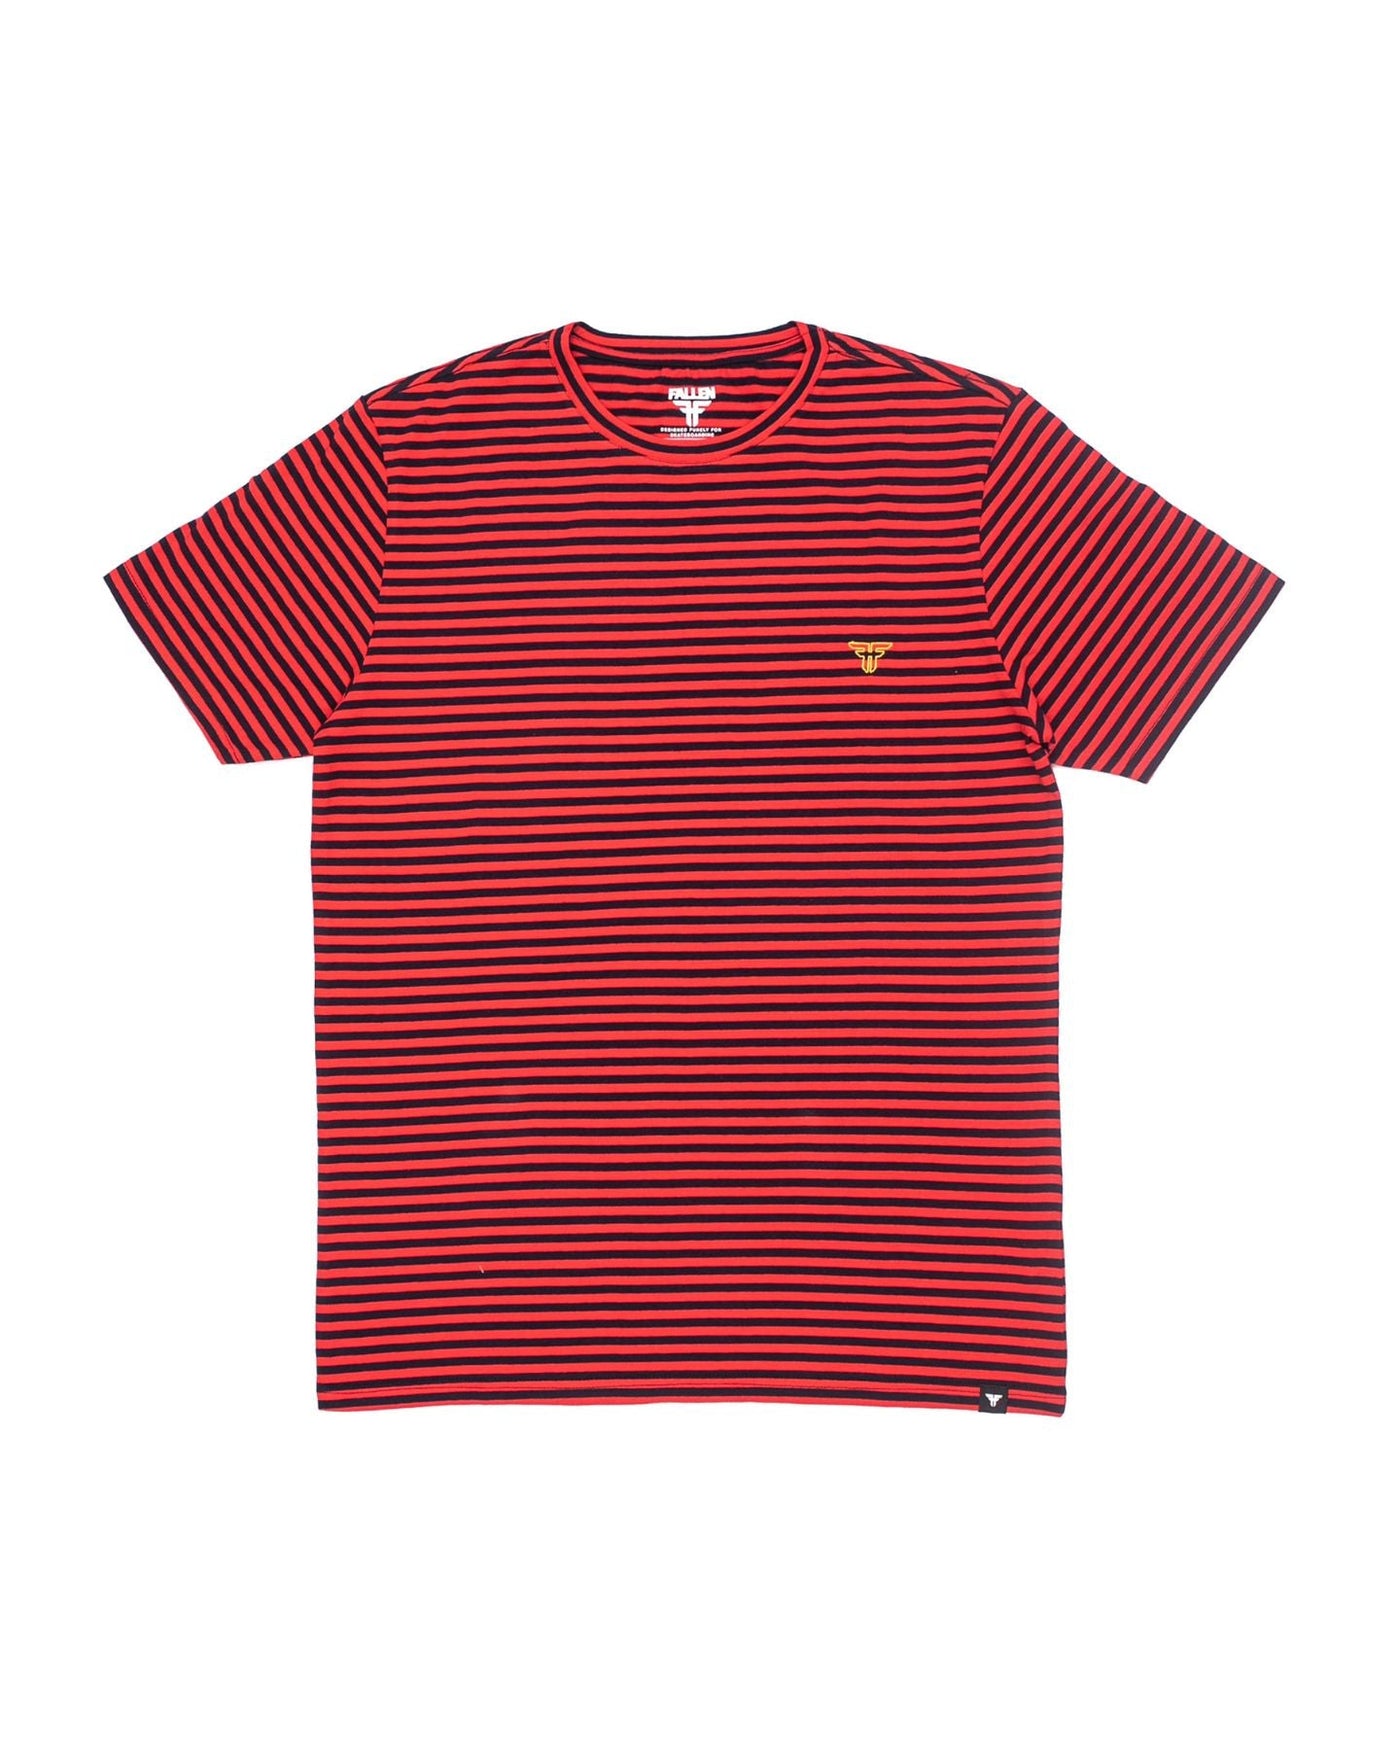 STRIPED TEE - RED / BLACK